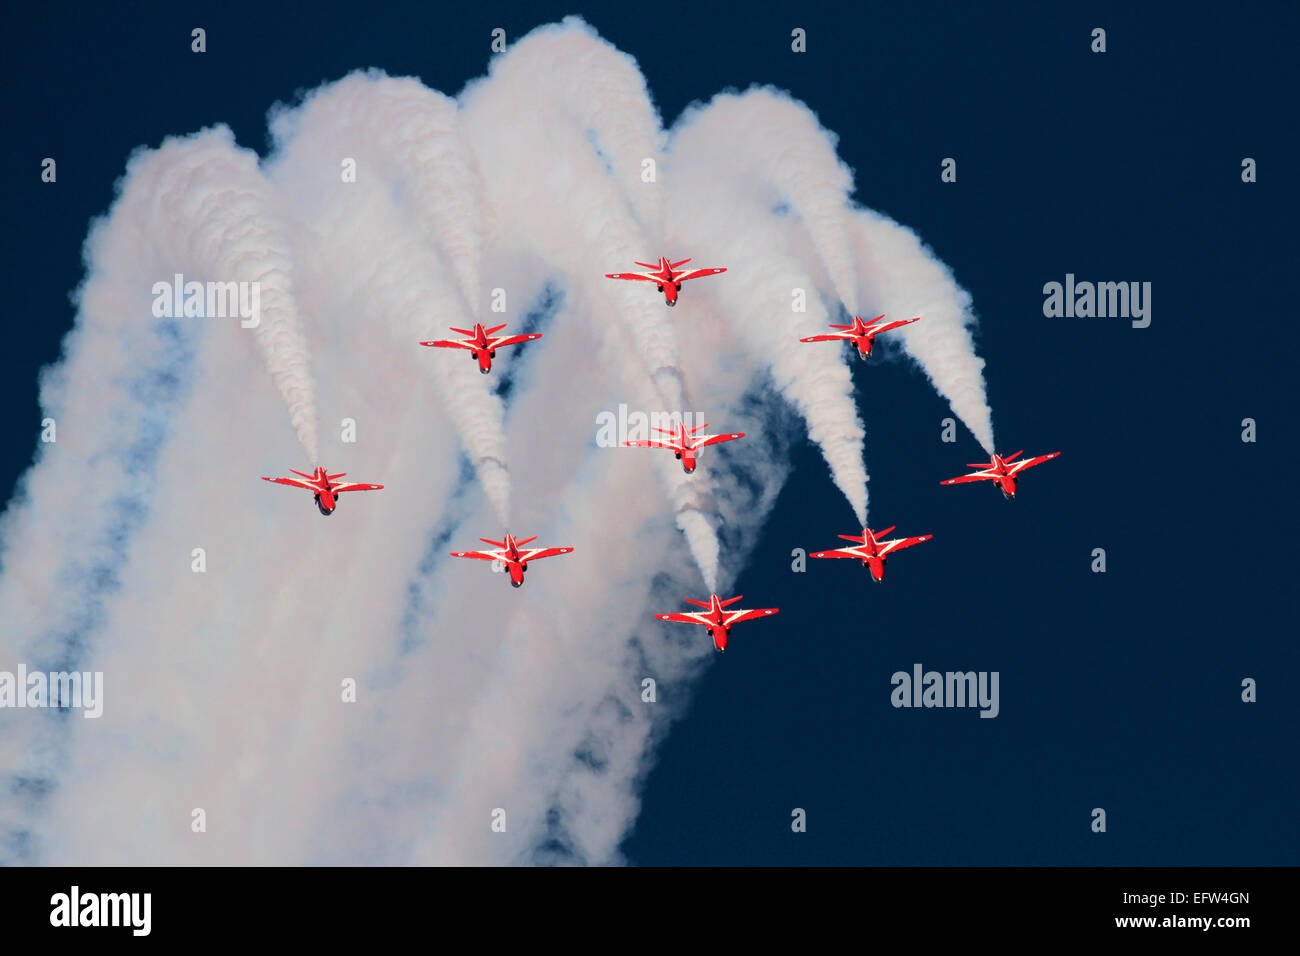 The Red Arrows aerobatic display team of Britain's Royal Air Force performing a formation loop during an airshow display Stock Photo